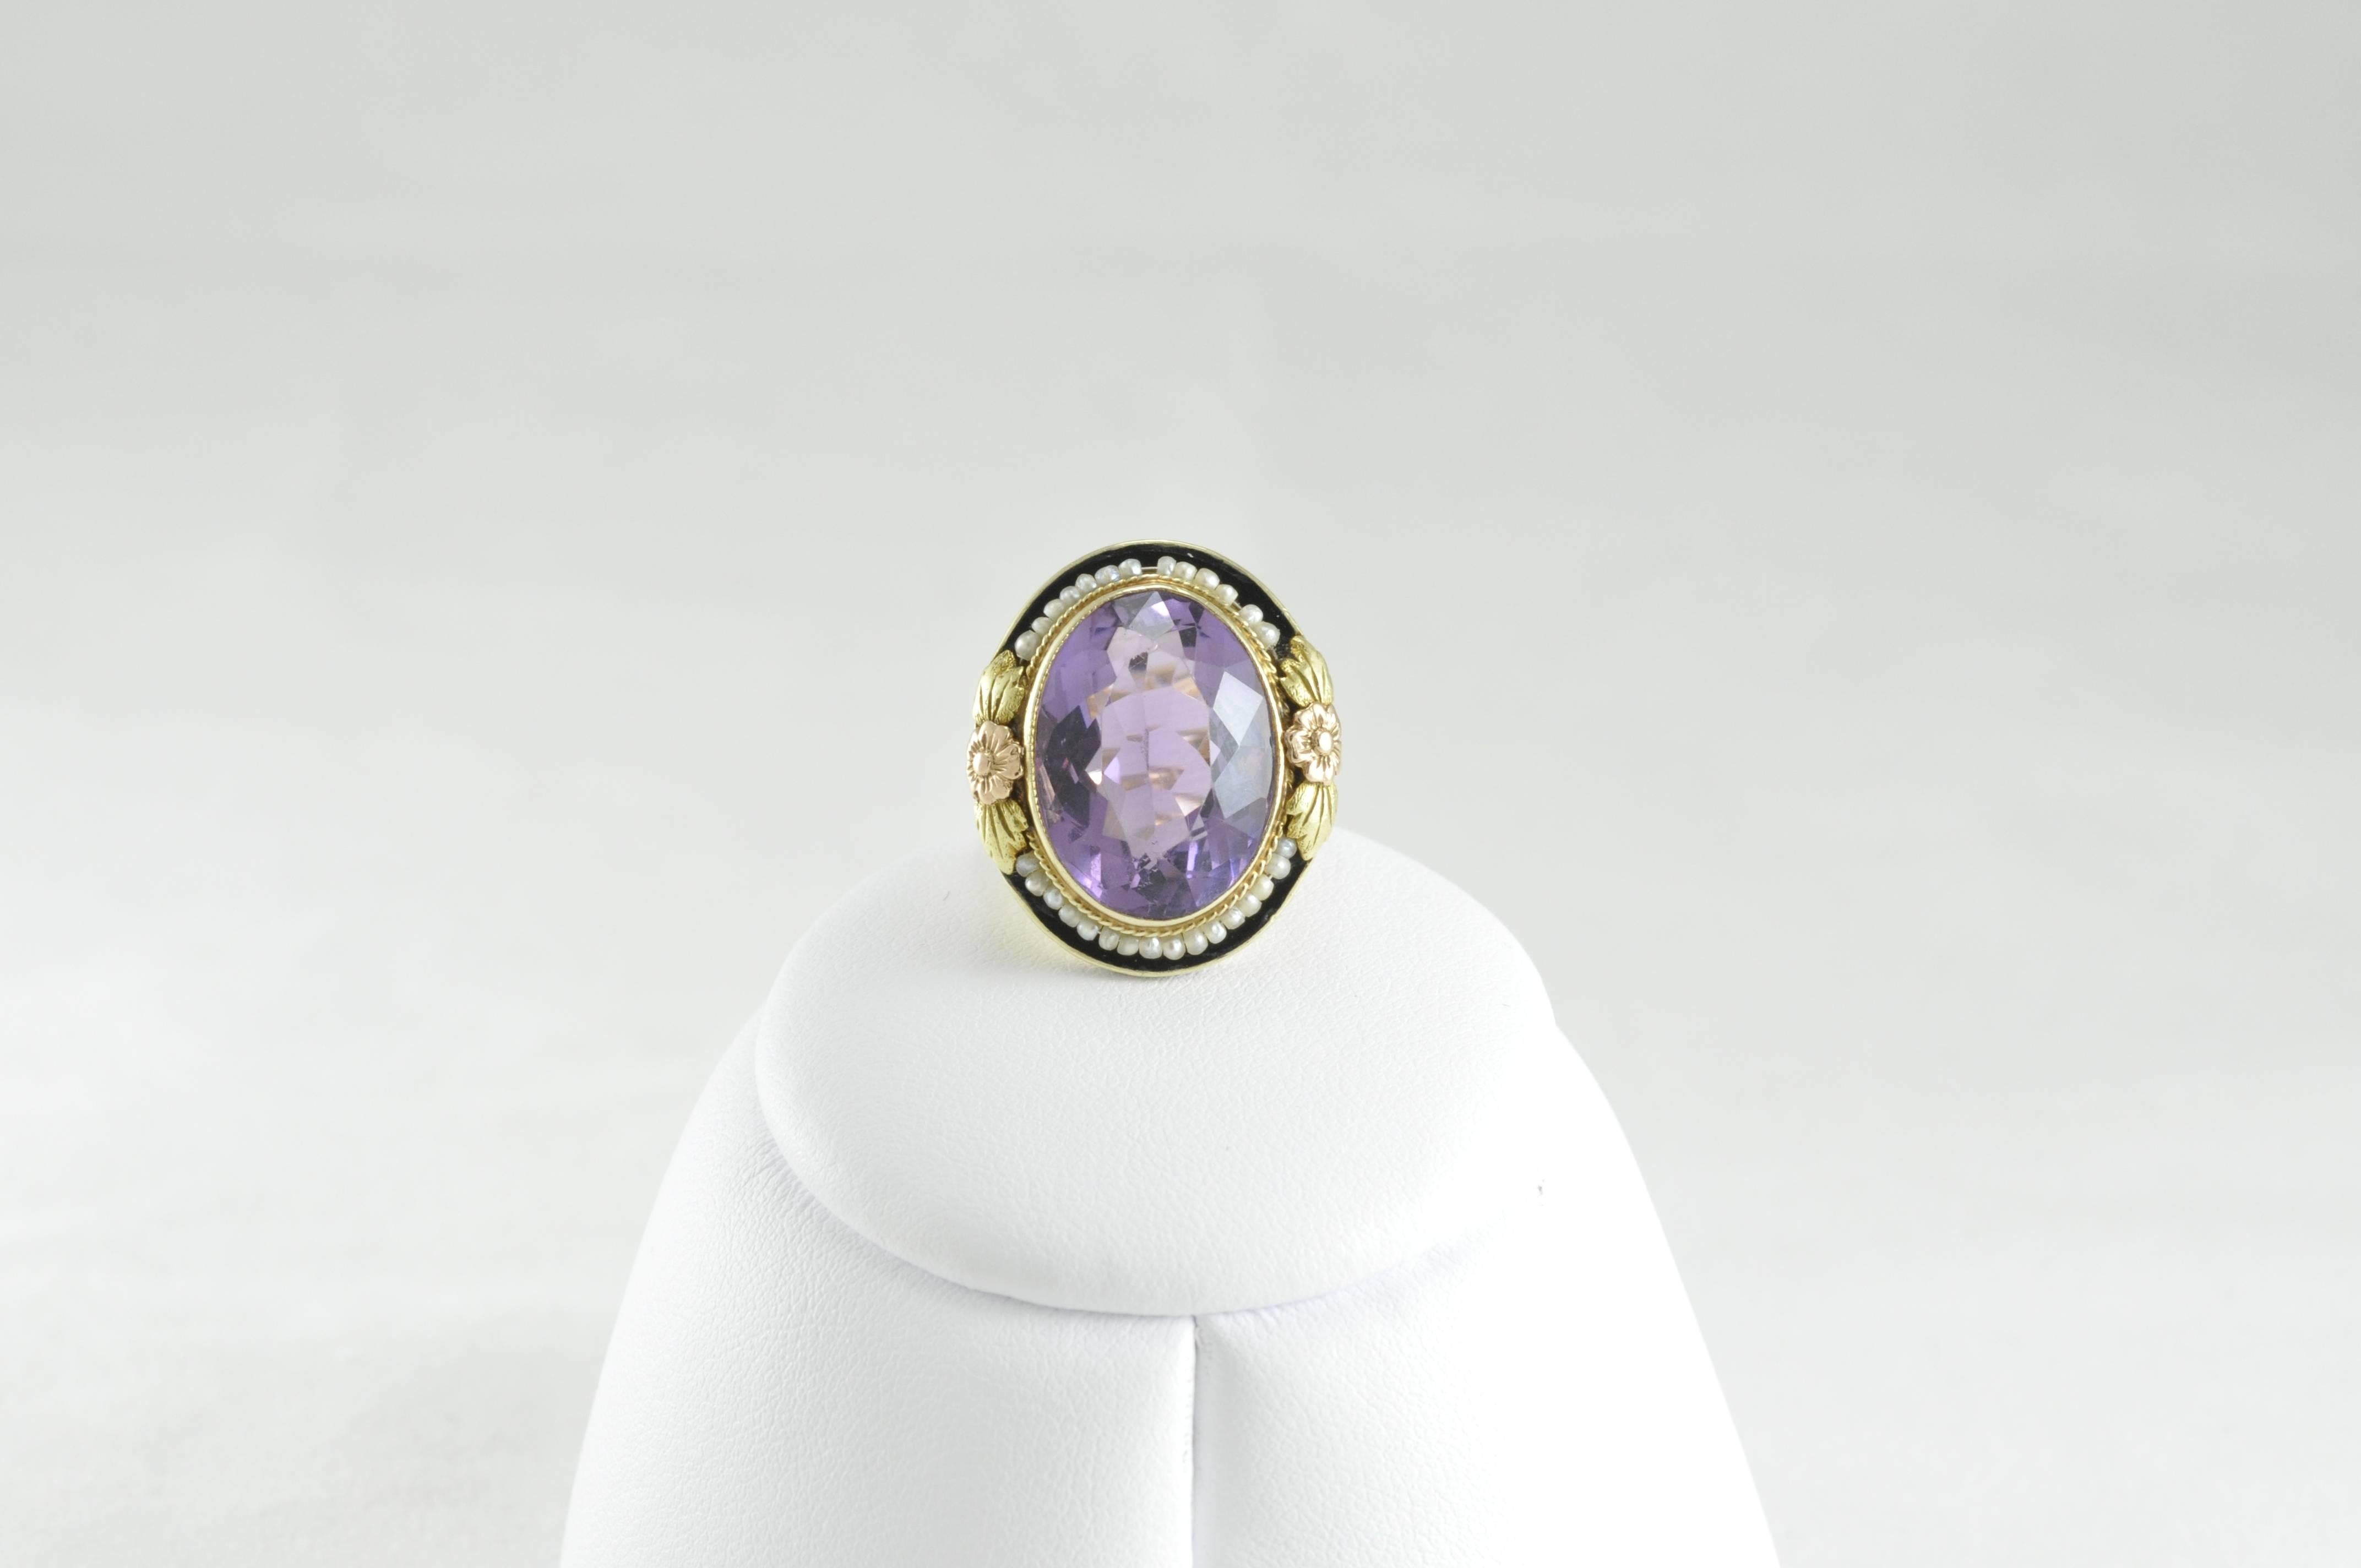 Beautiful Vintage 14k Yellow Gold Oxidized Seed Pearl Ring 
Amethyst Stone. 
Size 6
Rose Gold Detail 
Amethyst is approximately 8.5 carats.  14k yellow and Rose Gold with Painted Enamel.  Medium to Good Condition, missing one pearl.  
